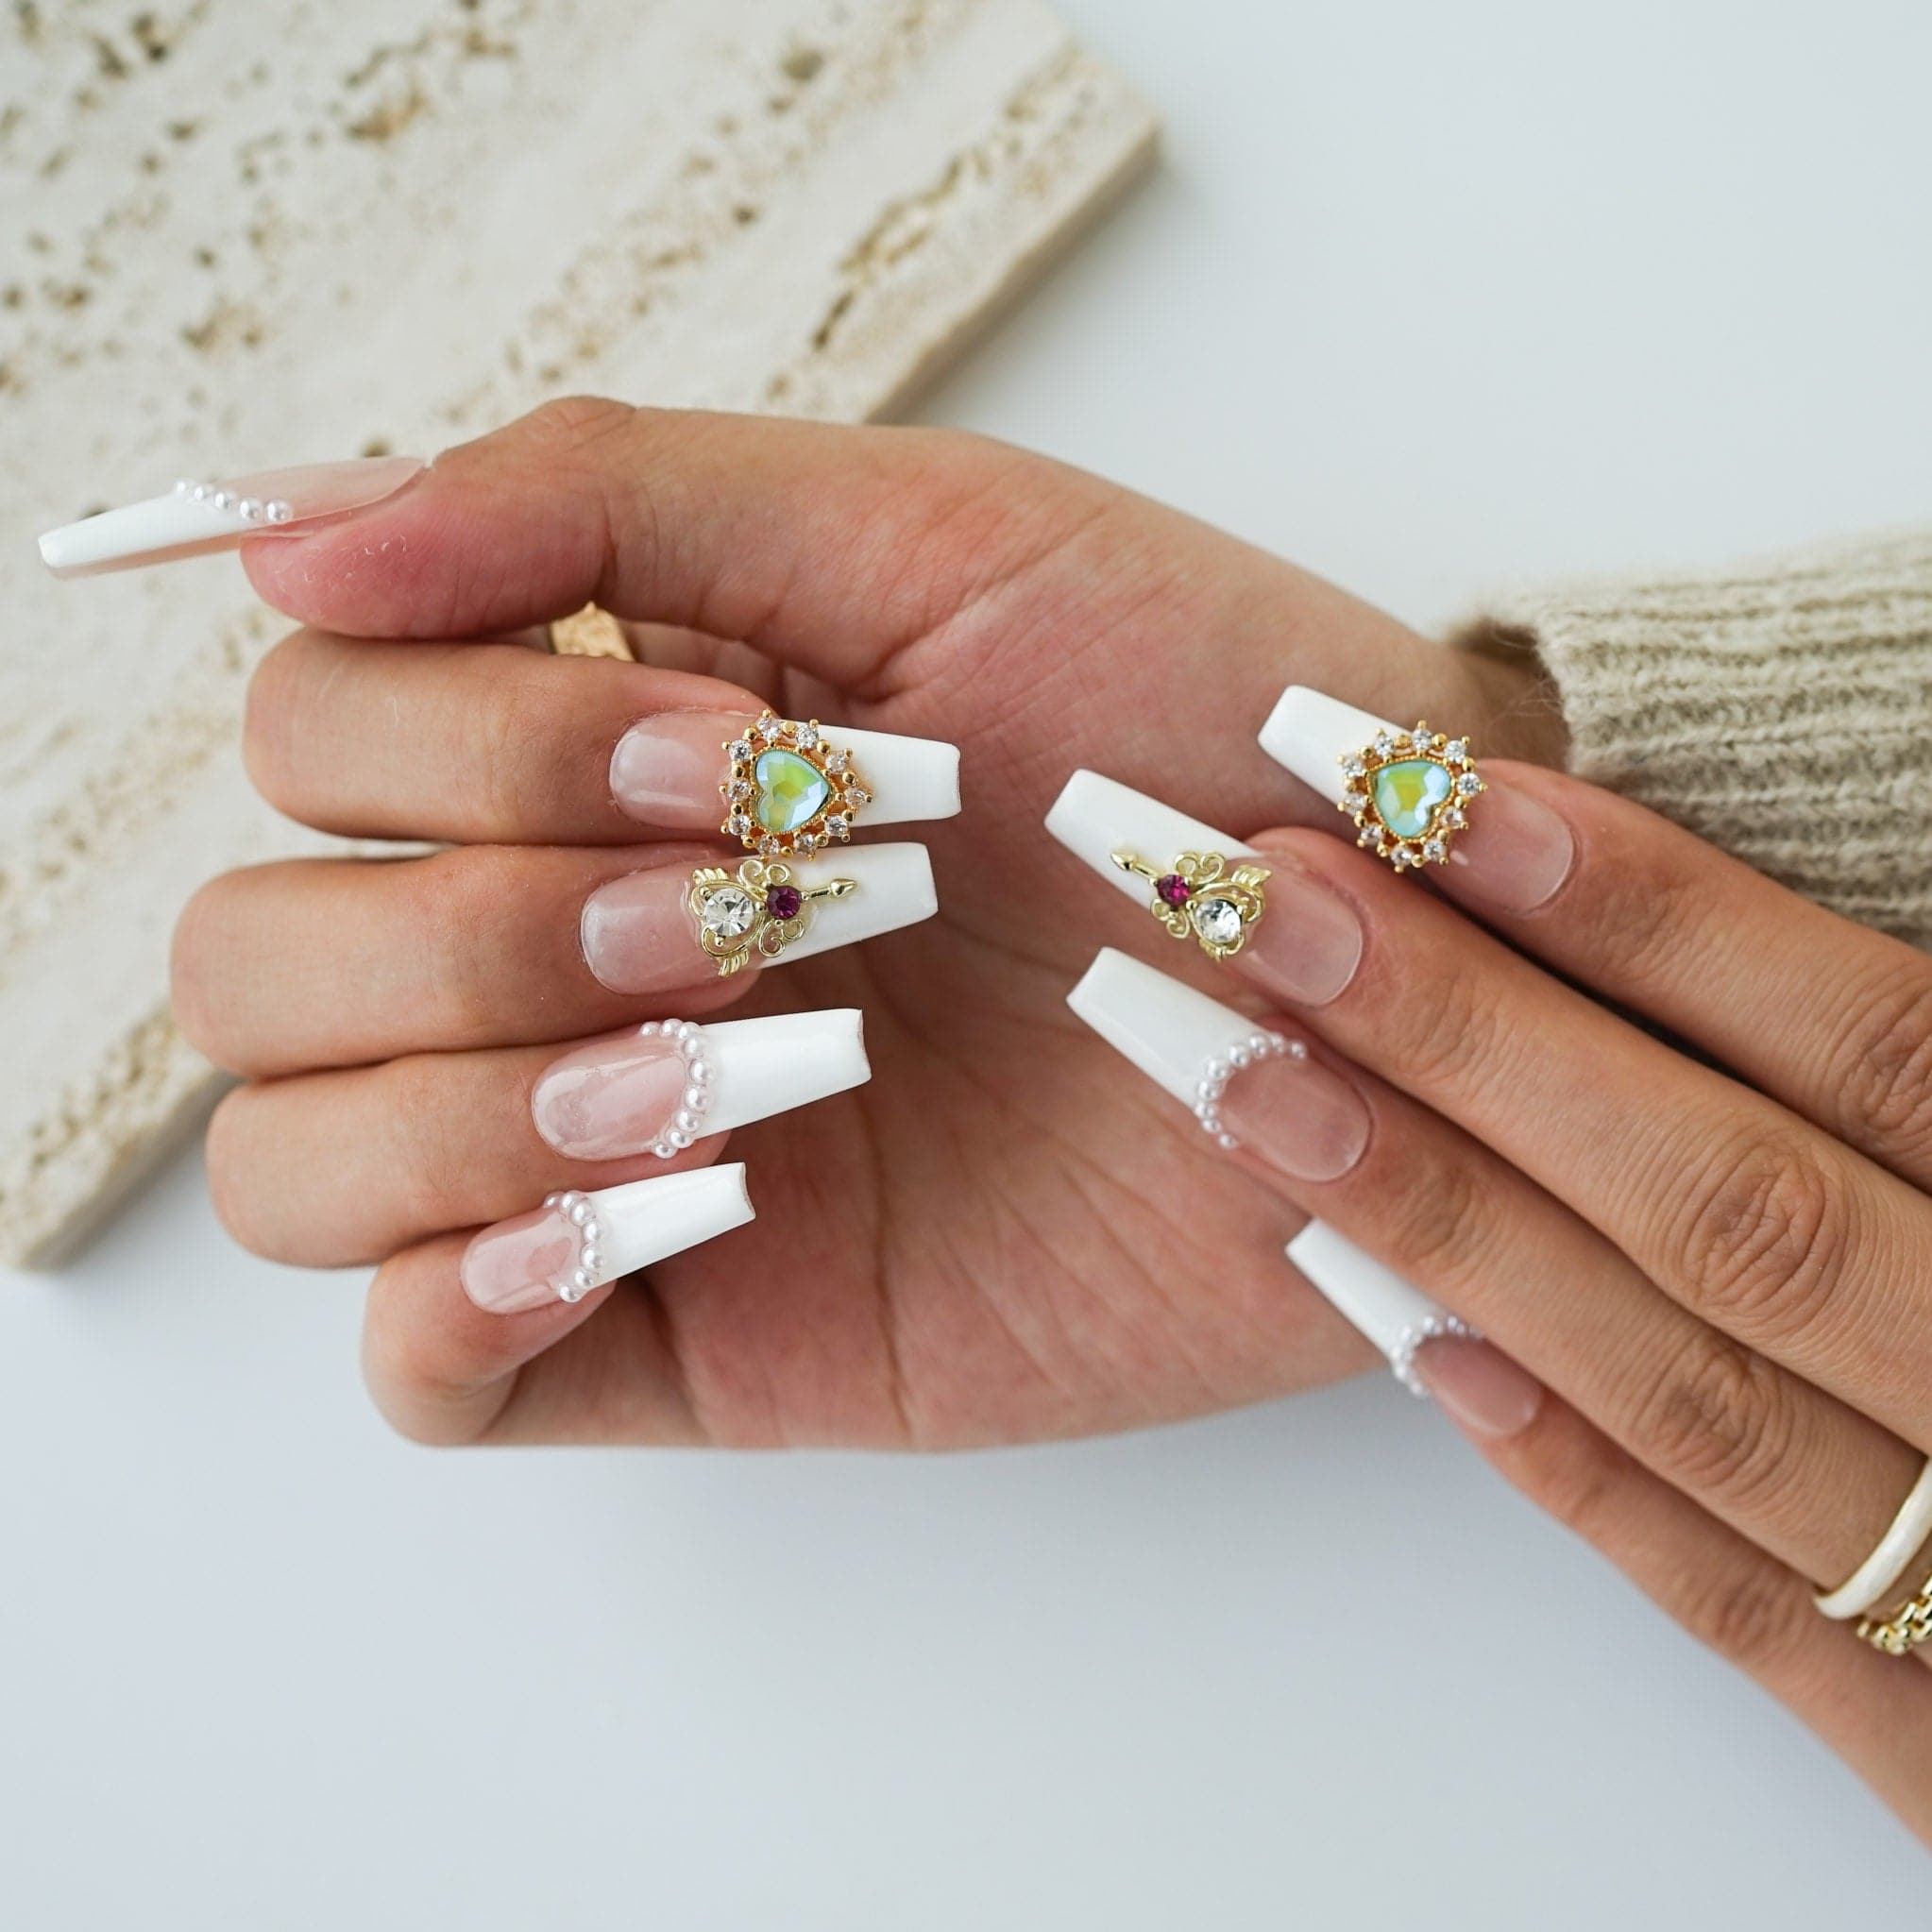 French tip Nails White Long Coffin Nails Whispering Blossoms